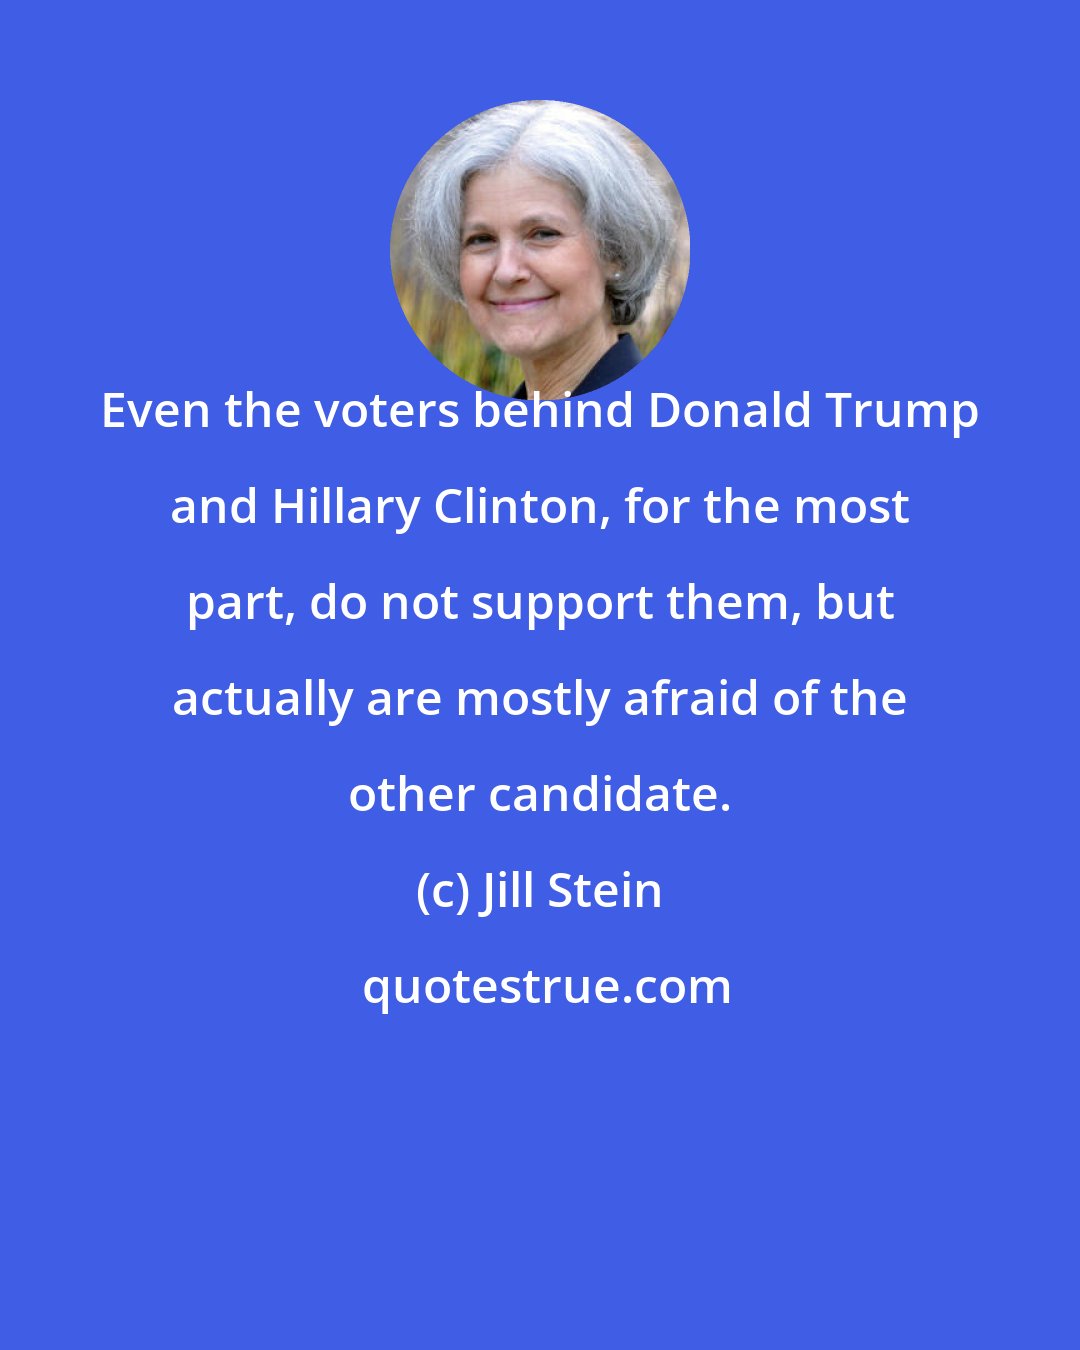 Jill Stein: Even the voters behind Donald Trump and Hillary Clinton, for the most part, do not support them, but actually are mostly afraid of the other candidate.